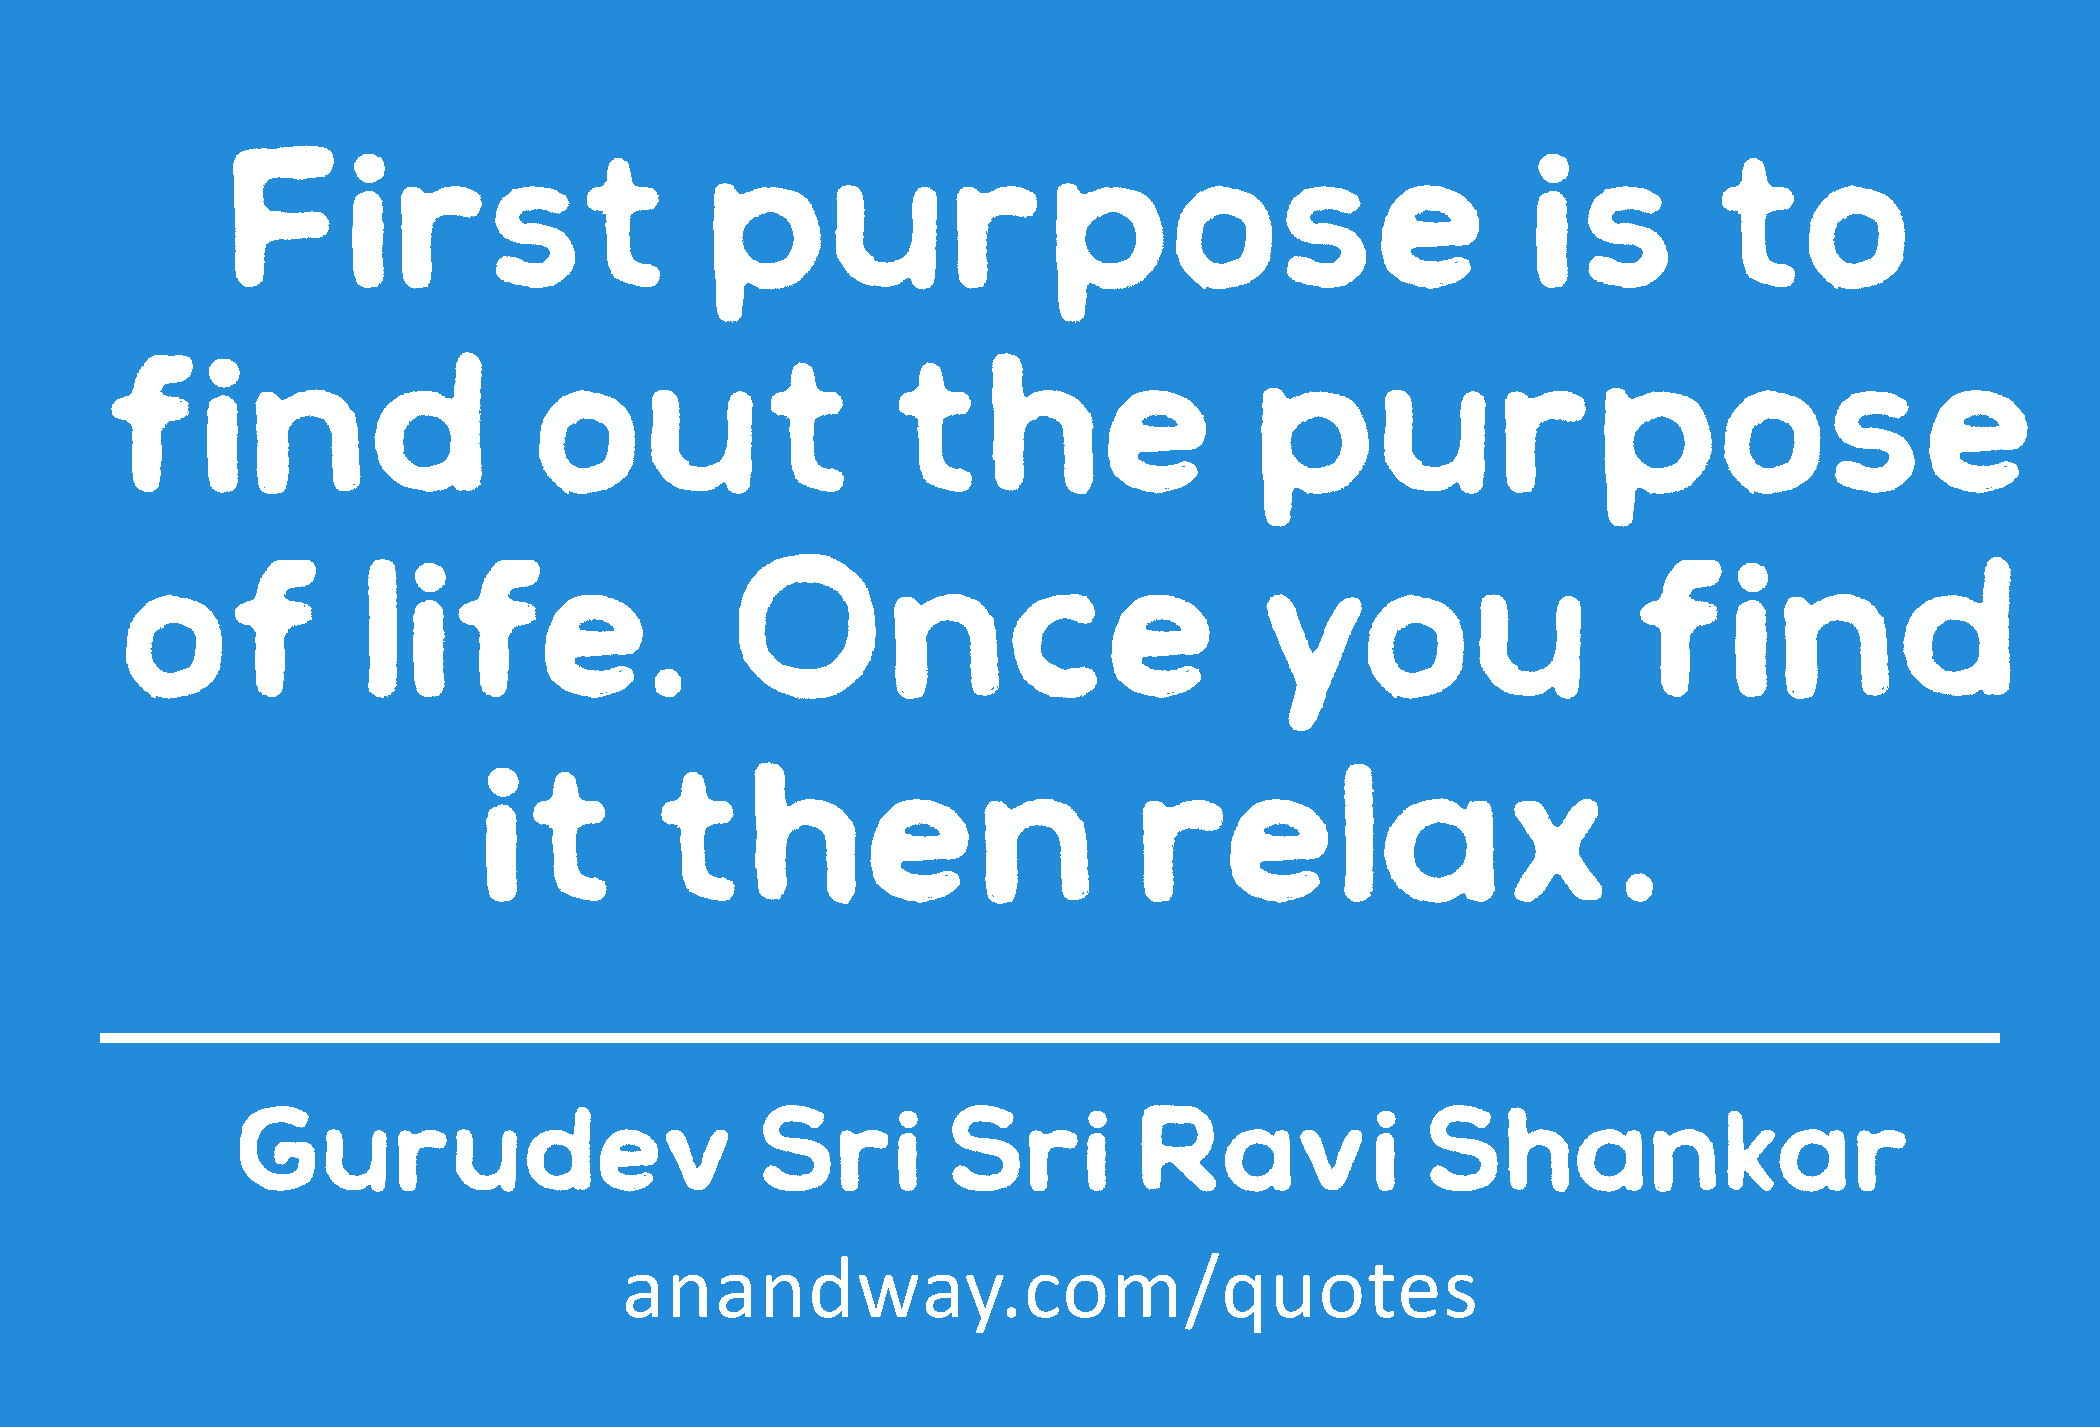 First purpose is to find out the purpose of life. Once you find it then relax.
 -Gurudev Sri Sri Ravi Shankar